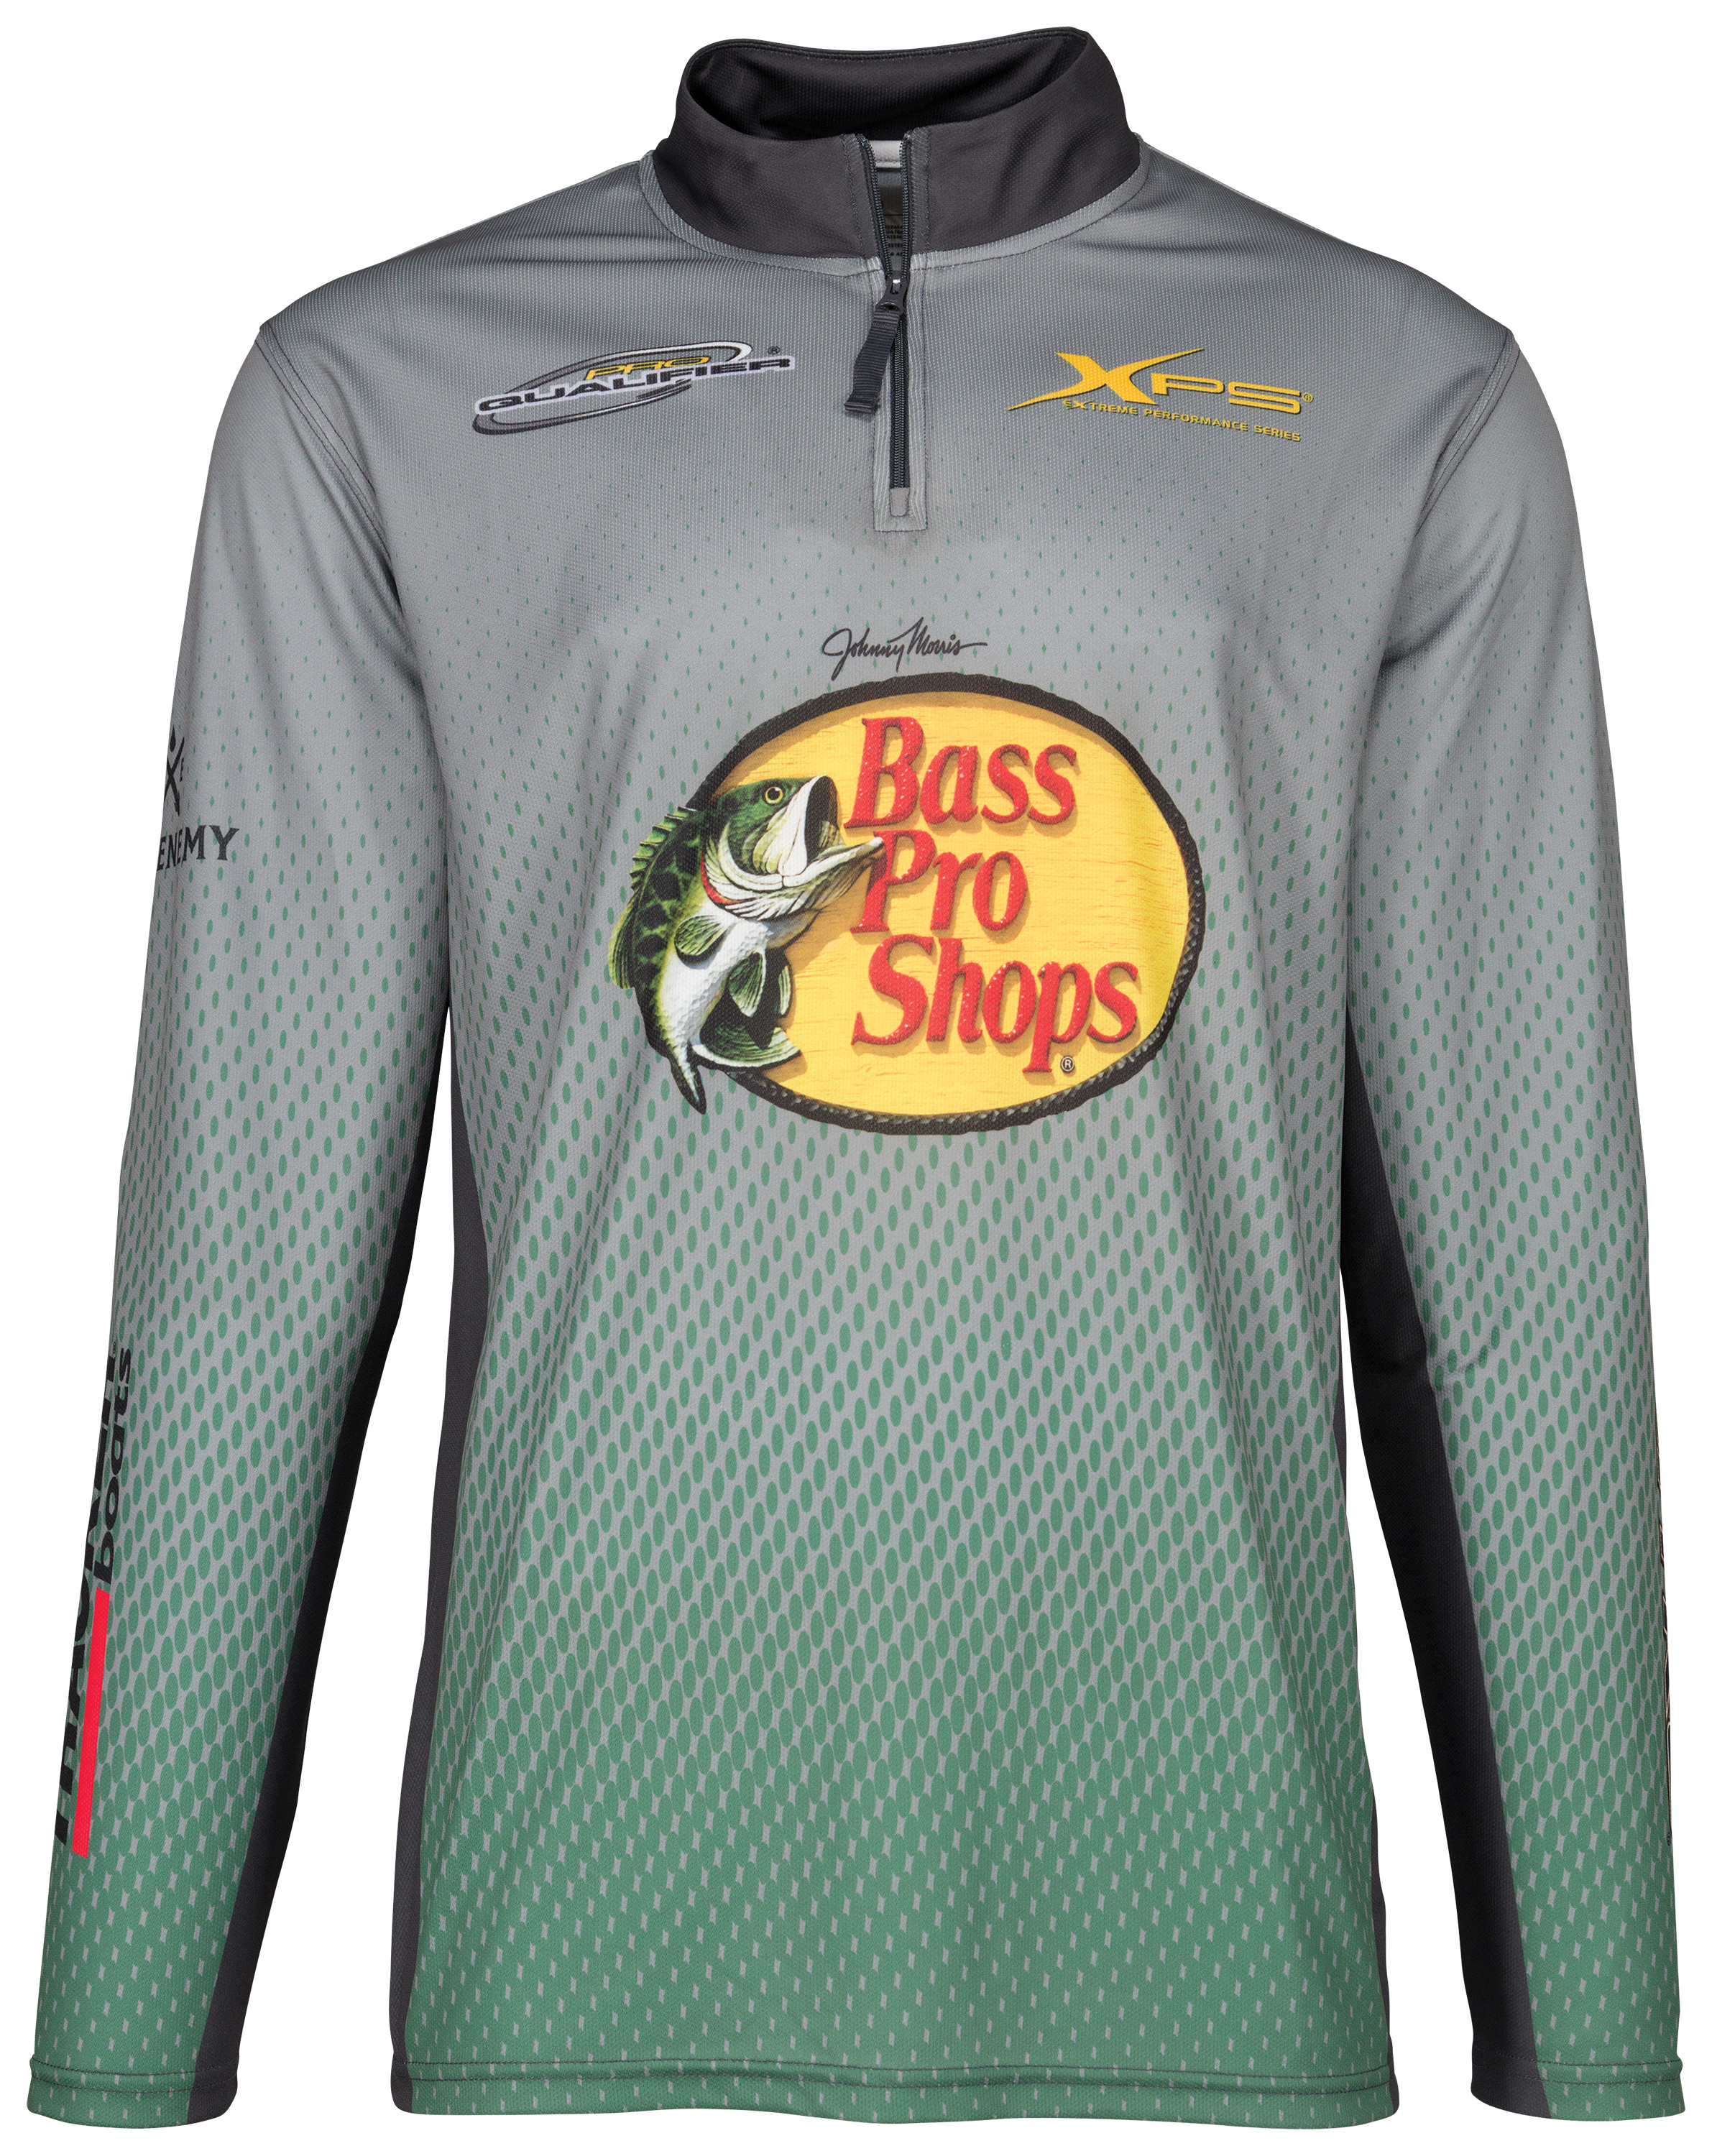 Bass Pro Shops Quarter-Zip Fishing Jersey Long-Sleeve Pullover for